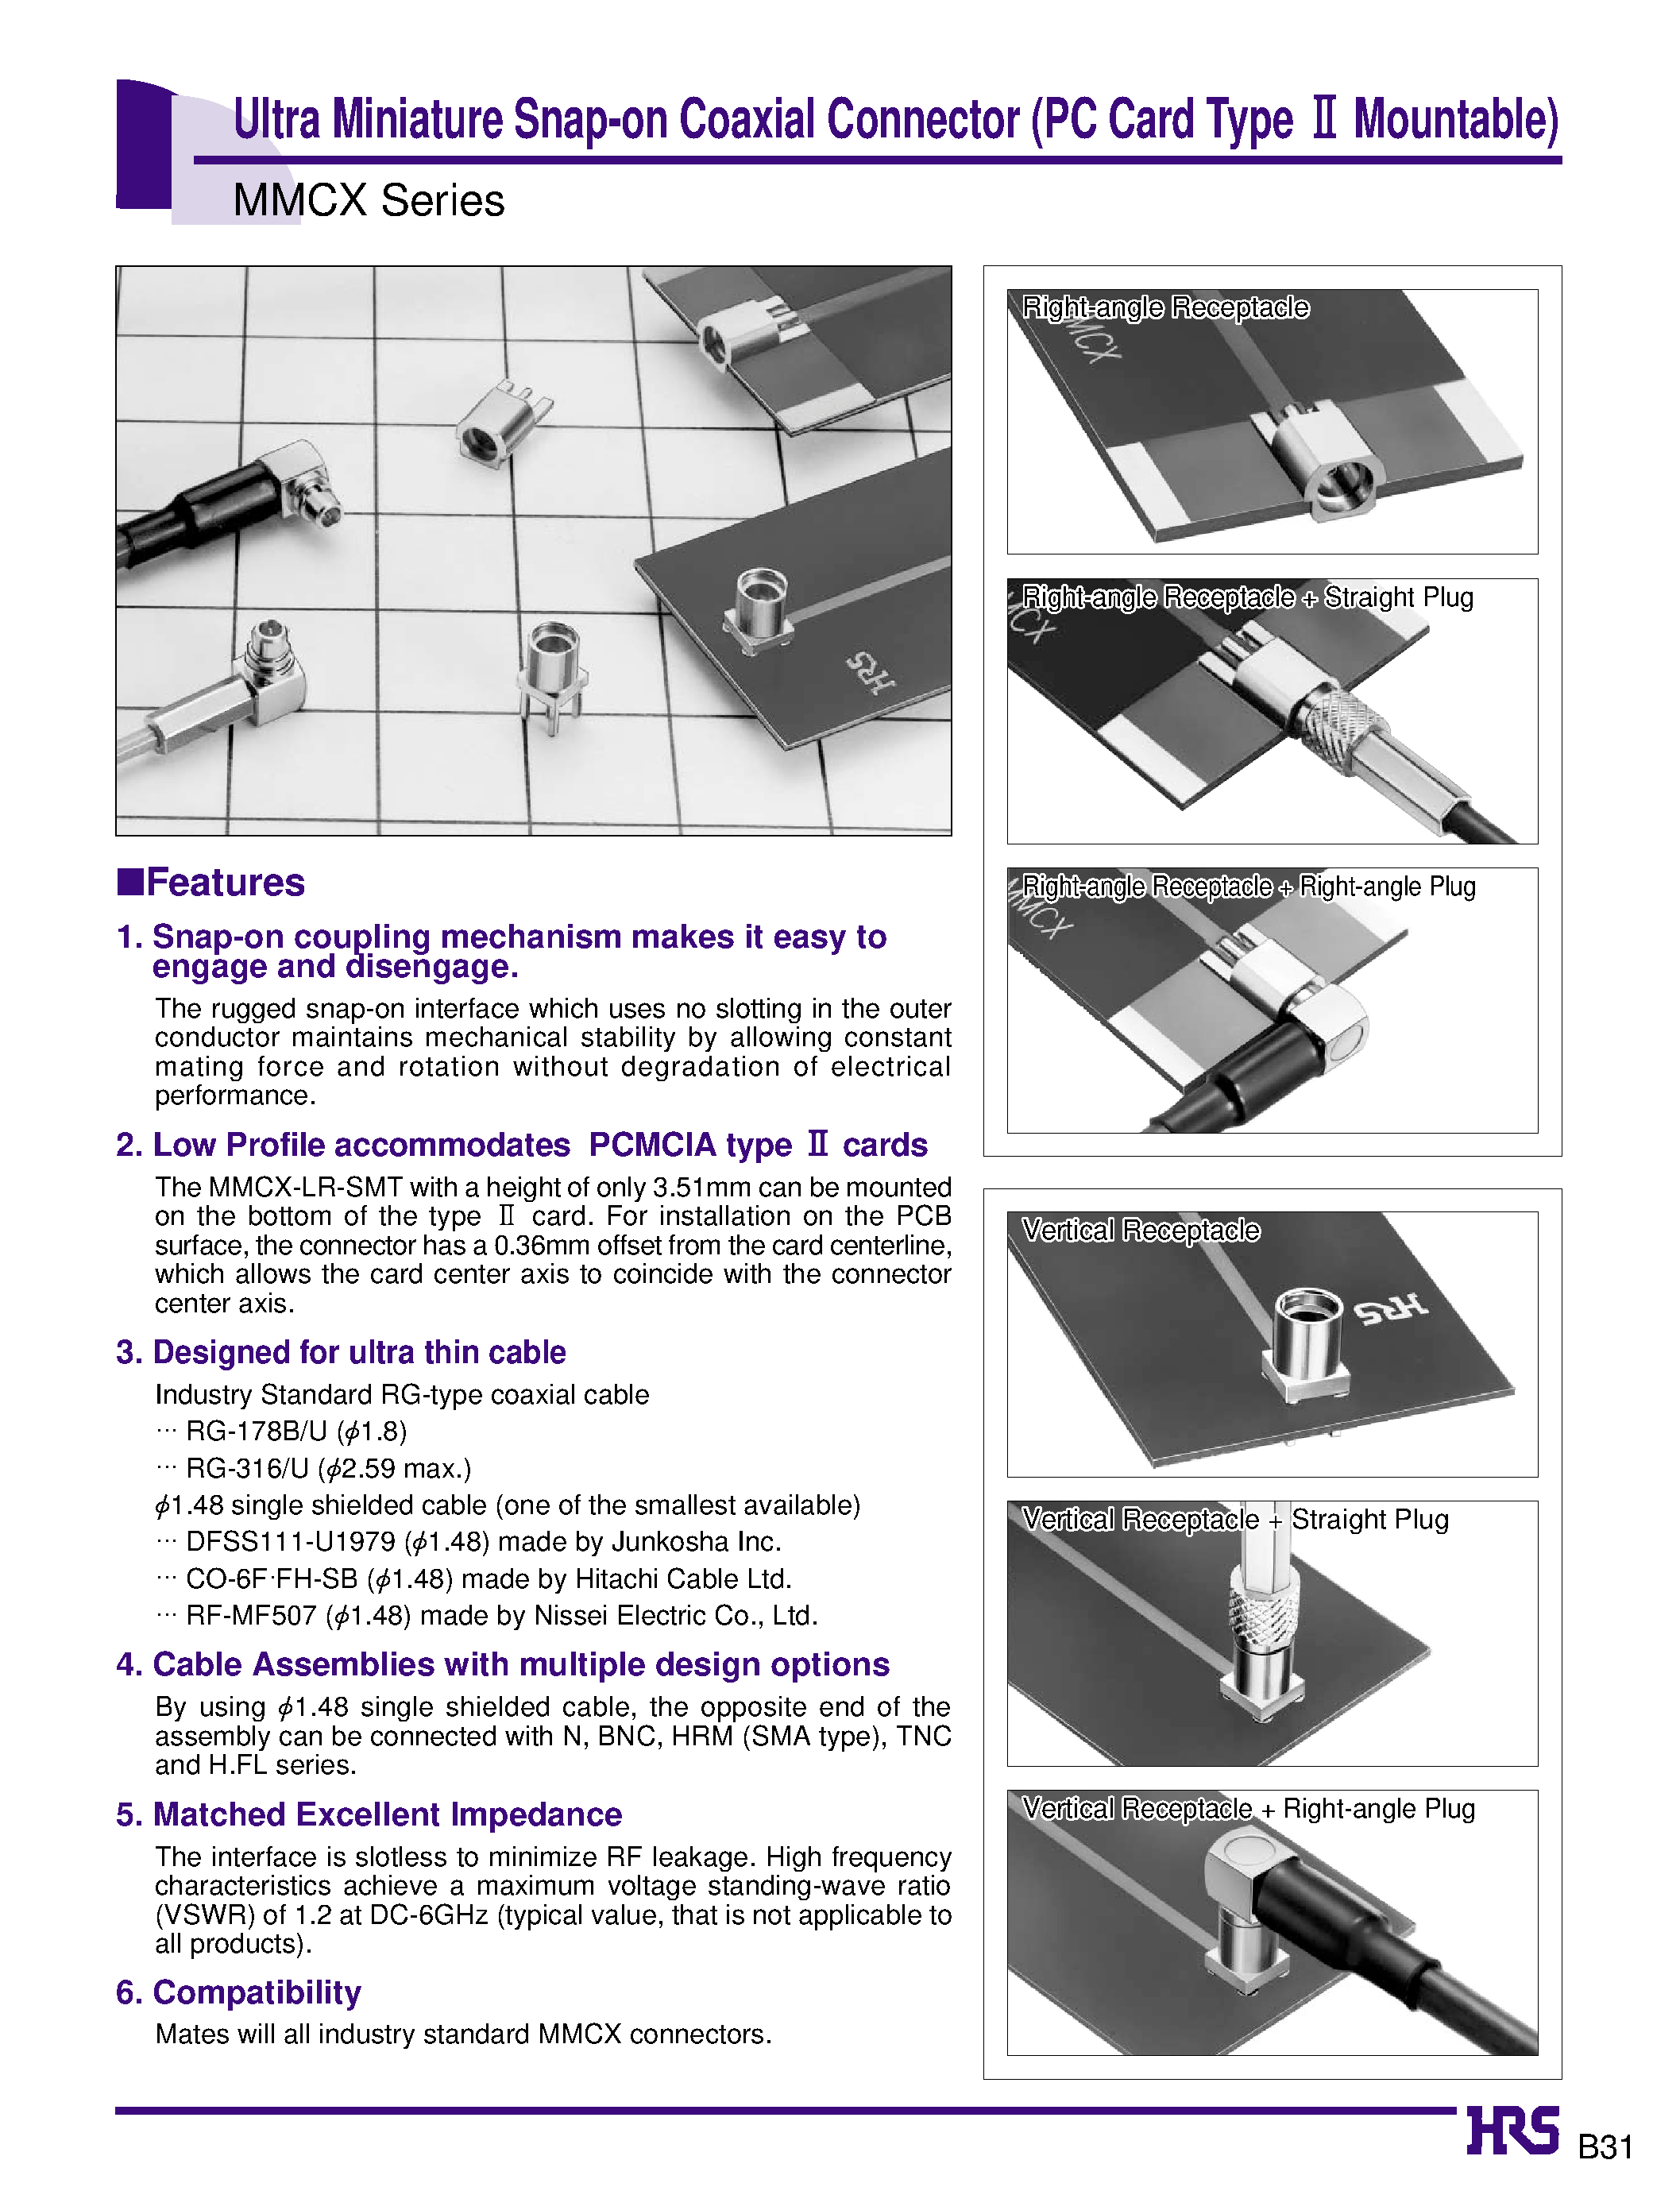 Datasheet MMCX-LR-178B/U - Ultra Miniature Snap-on Coaxial Connector (PC Card Type 2 Mountable) page 1